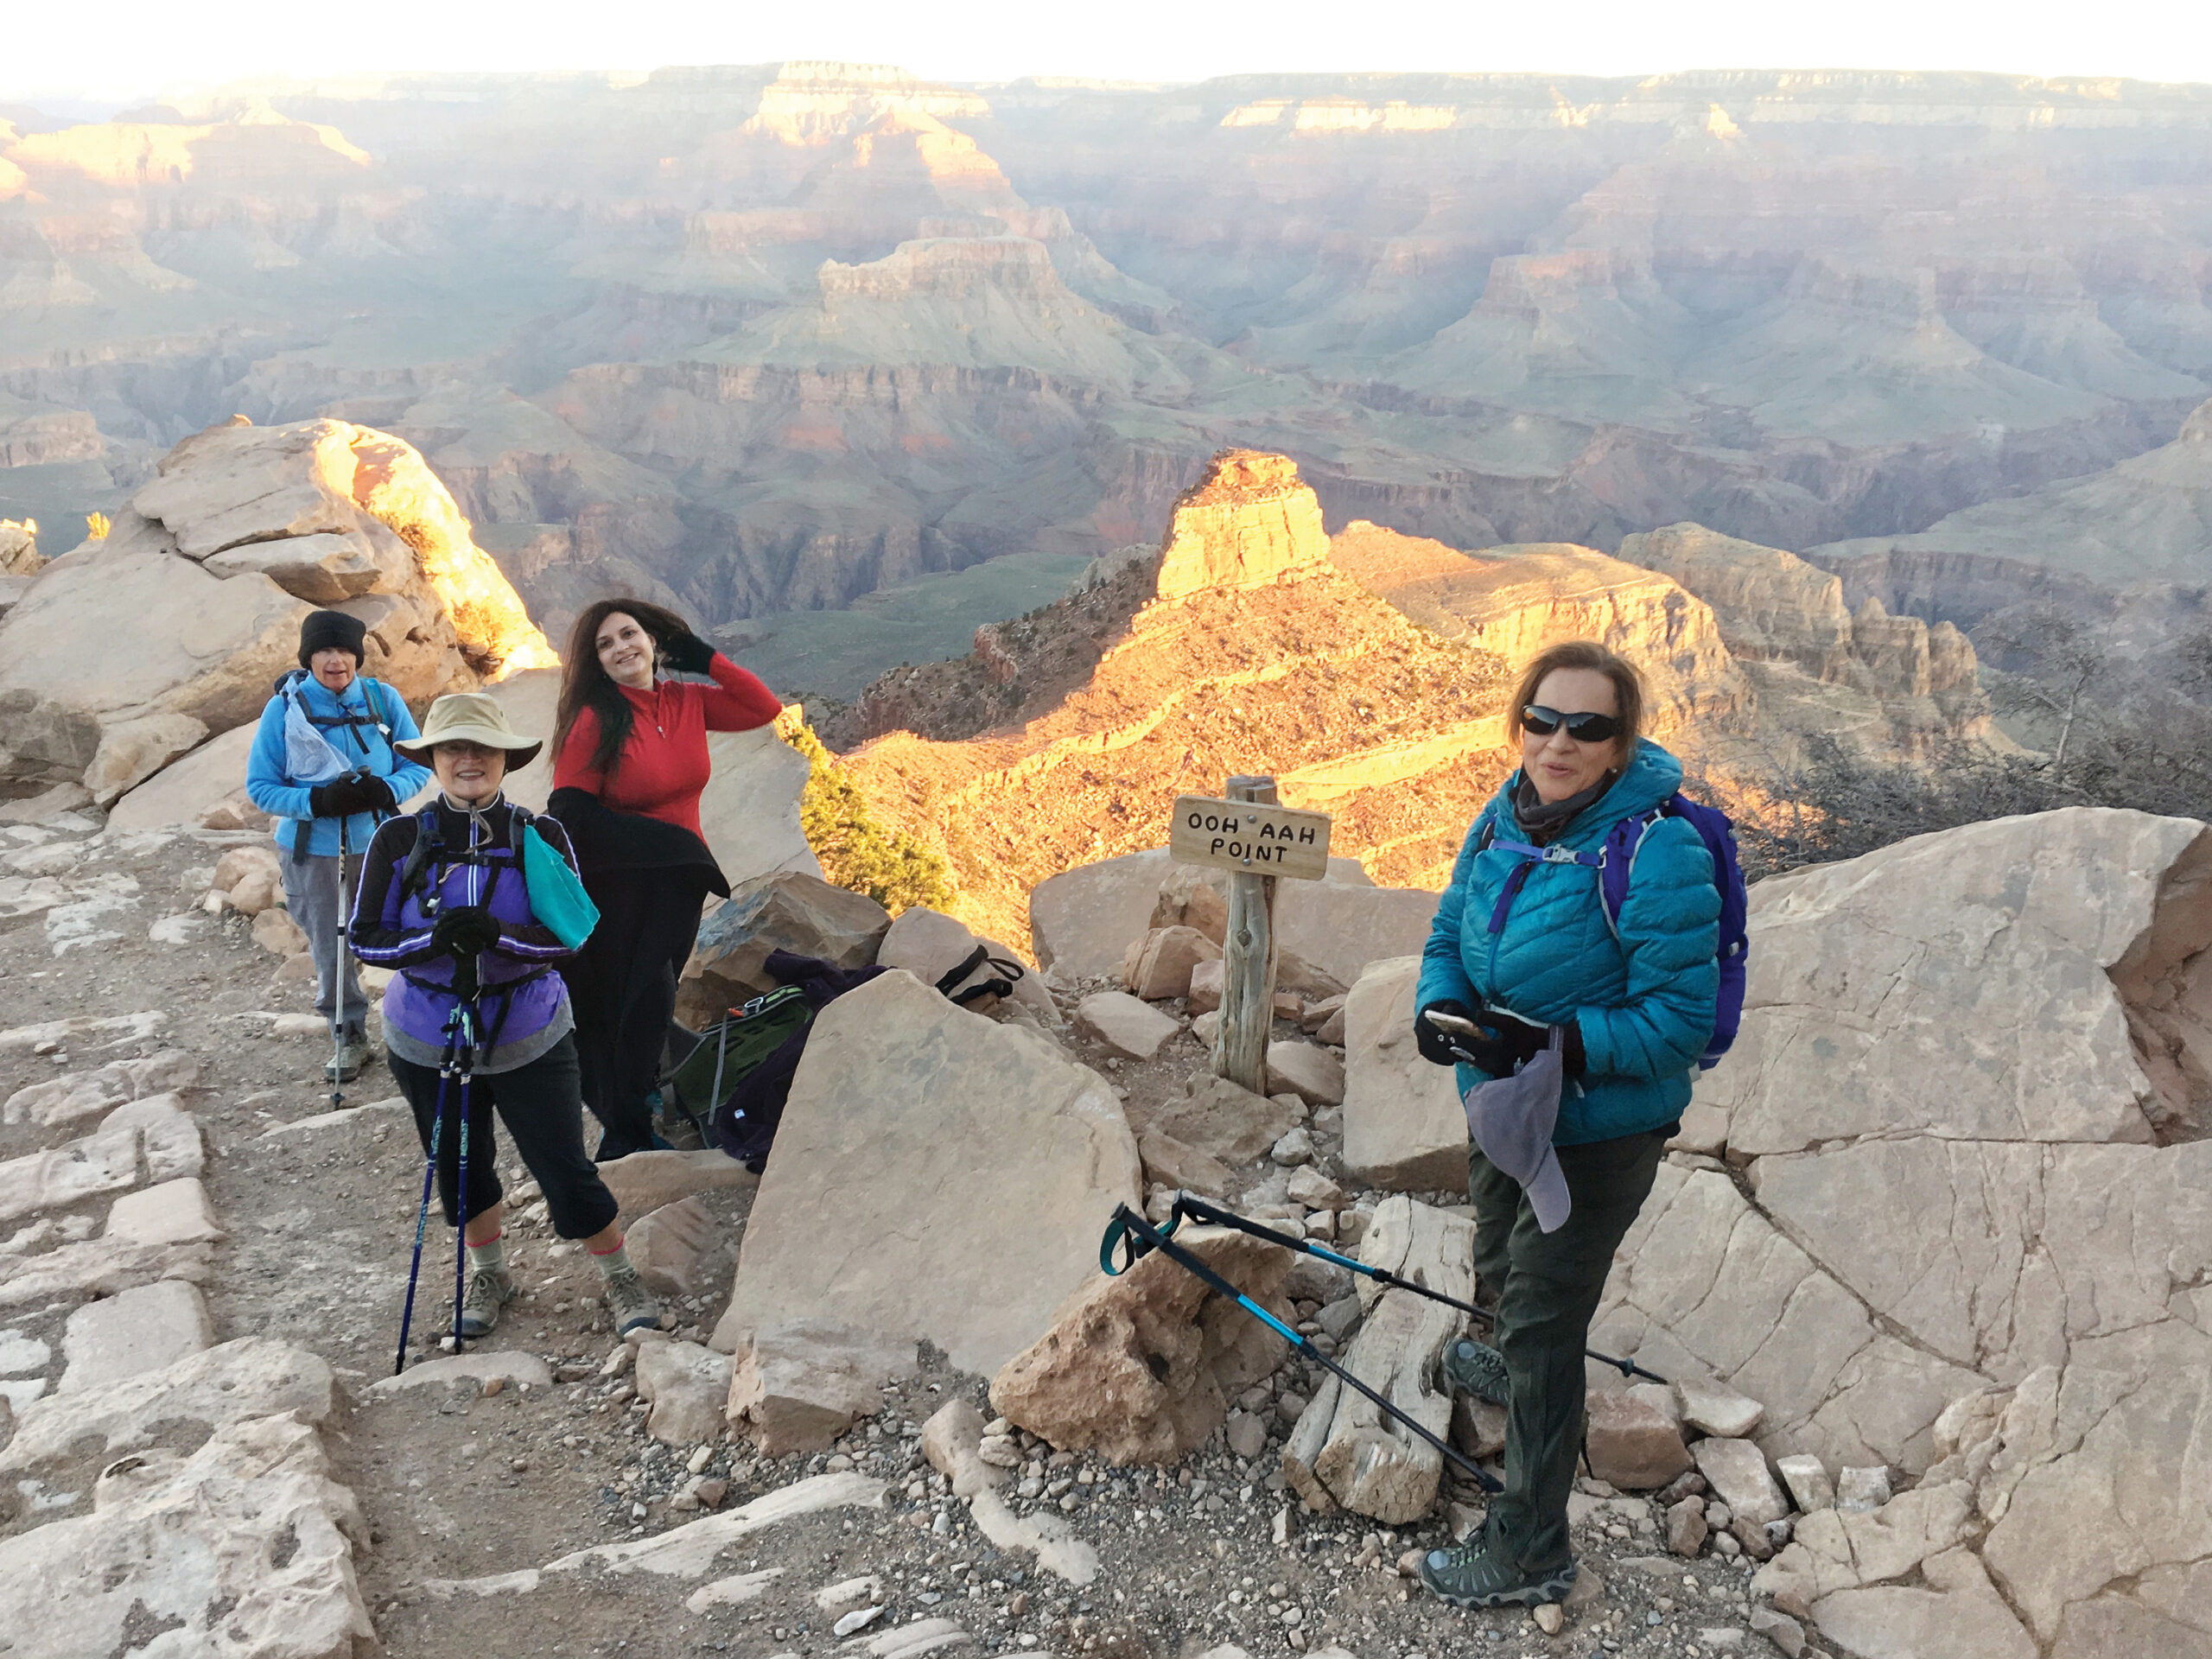 Ooh Aah Point at the Grand Canyon. Pictured (left to right) are club members DeEtte Faith, Tracy Nilsen, Melanie Hudson, and Rocio Smith. (Photo by Warren Wasescha)